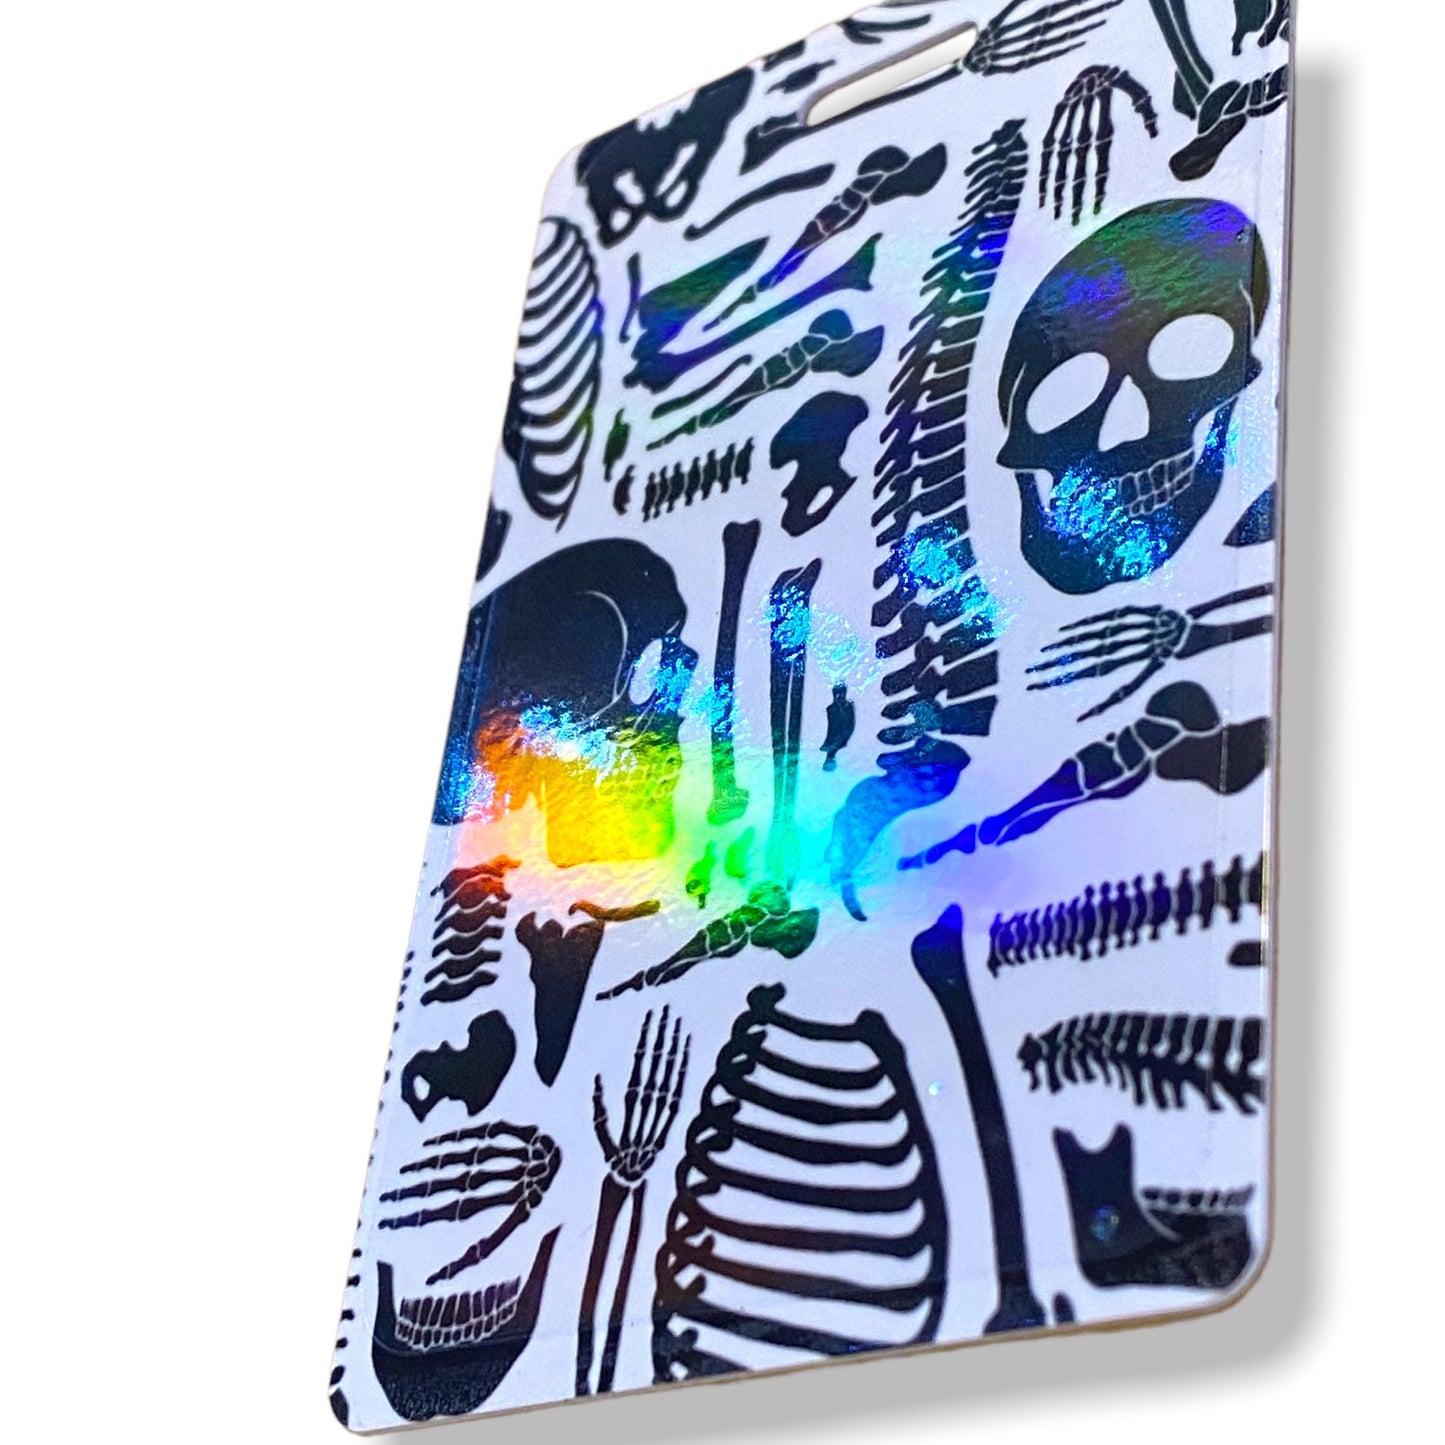 Rad Pad for Holding Xray Markers with Holographic Cover